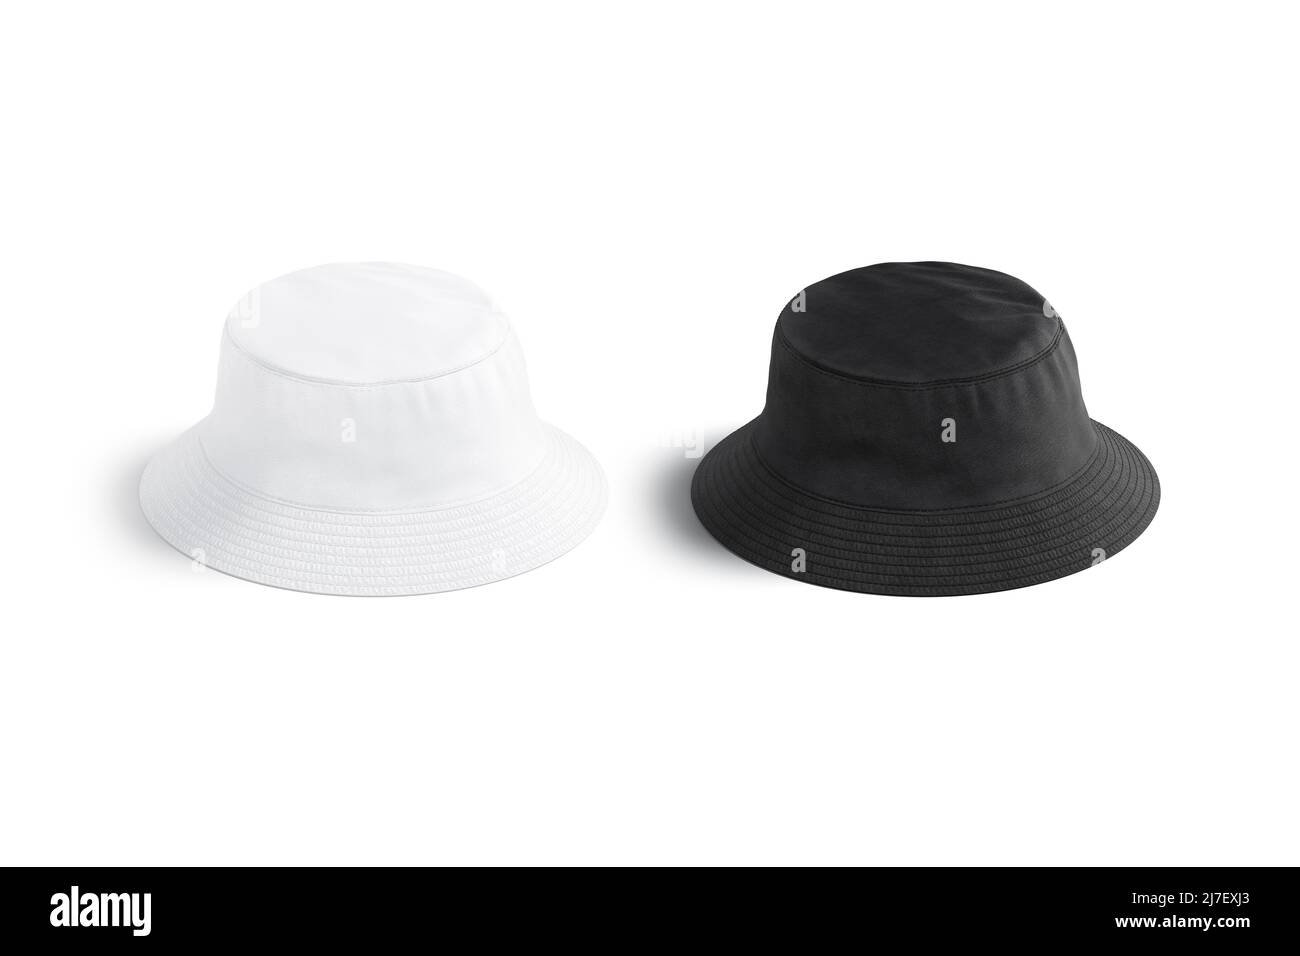 Blank black and white bucket hat mockup, front view Stock Photo